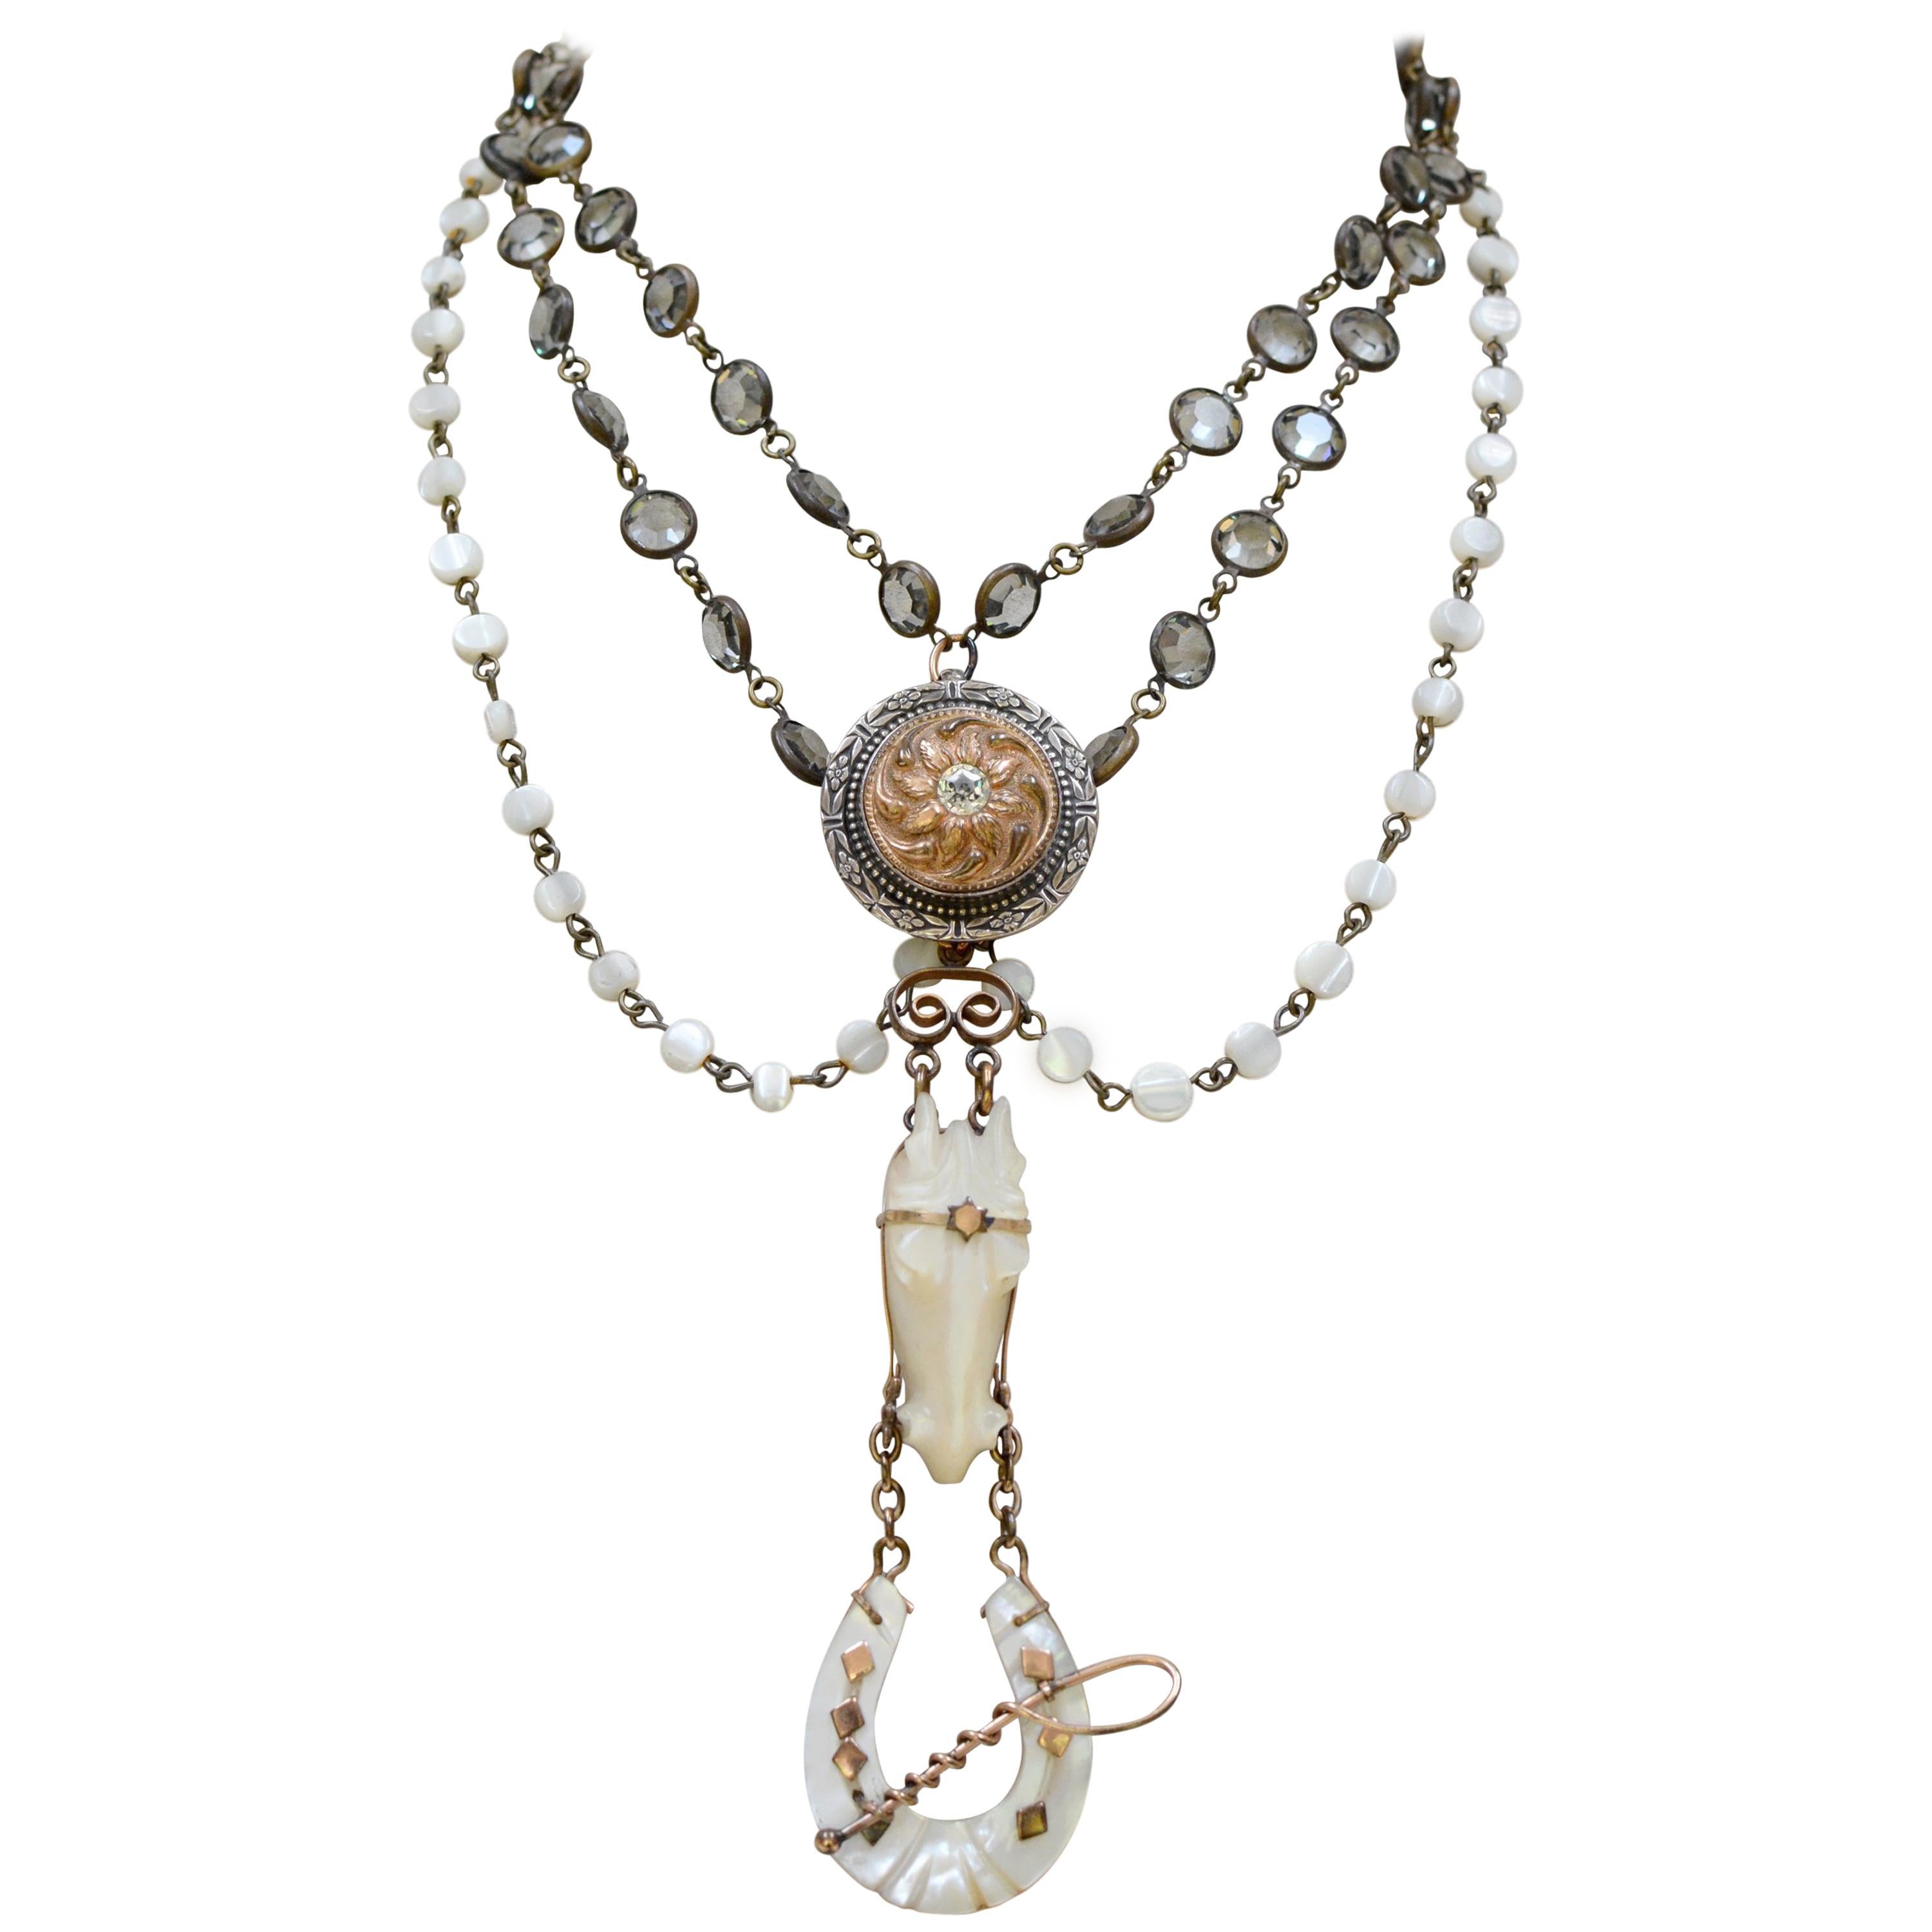 Jill Garber Love Token Necklace with Rare Carved Antique Mother-of-Pearl Horse